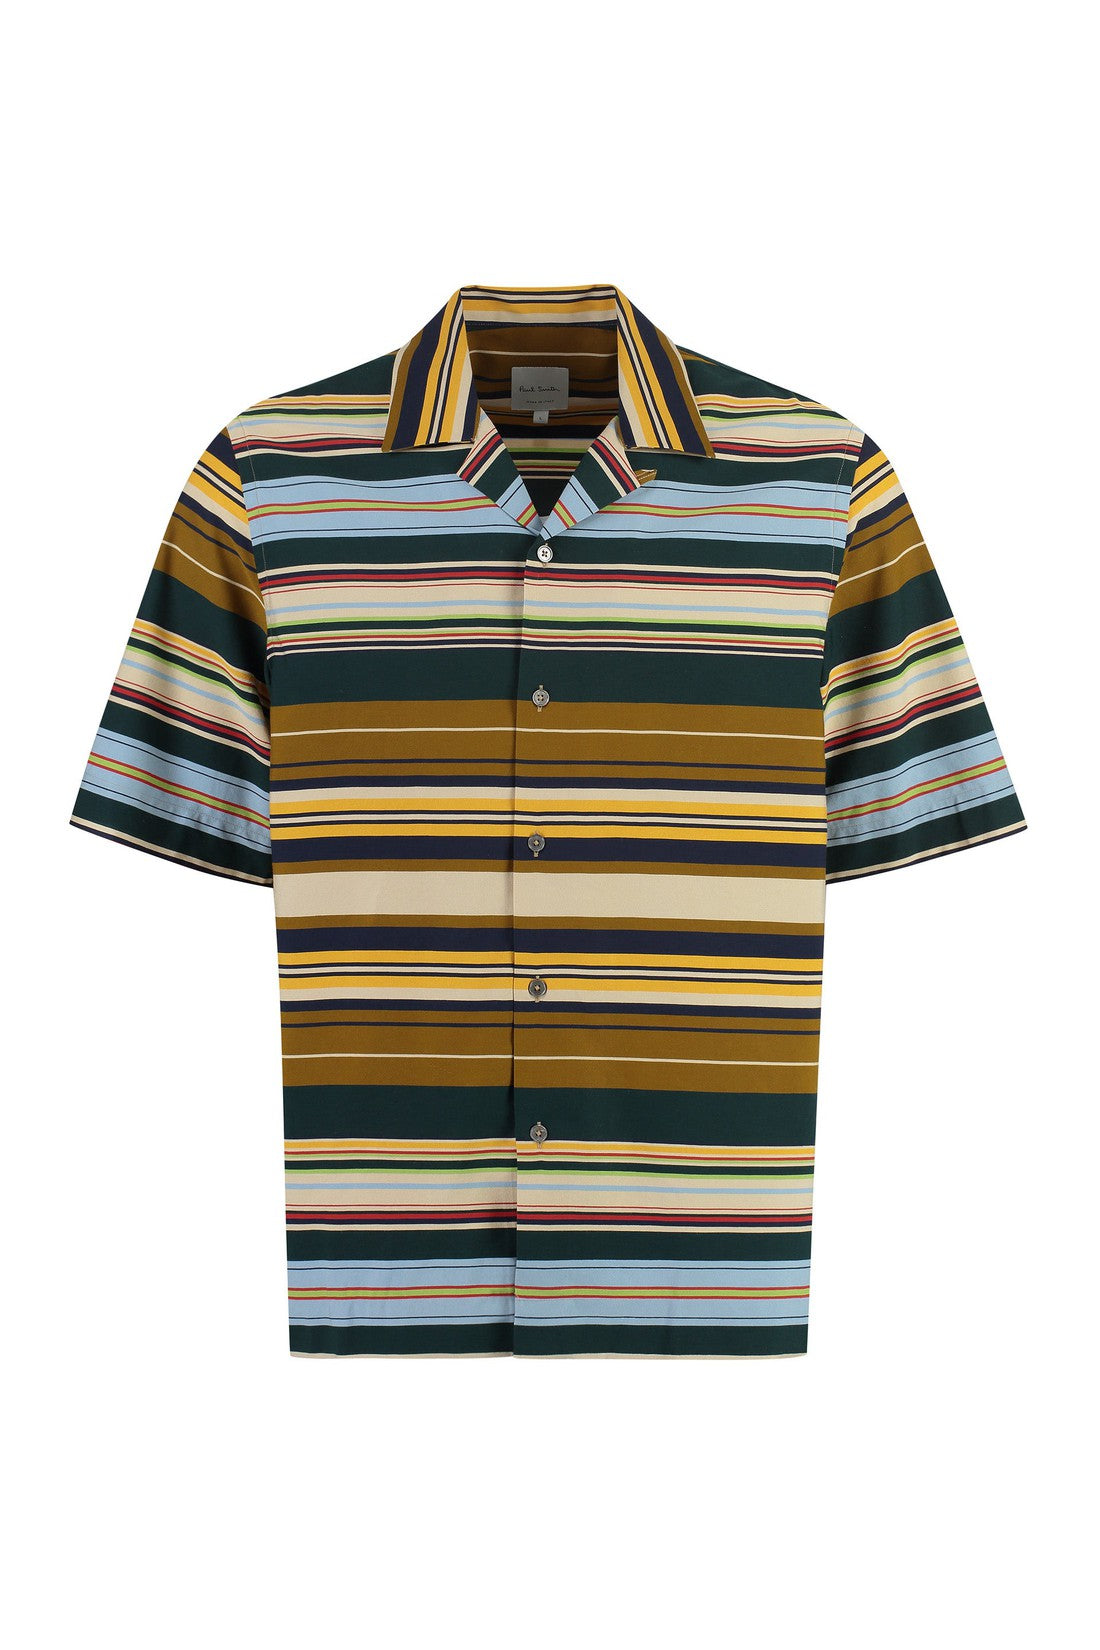 Paul Smith-OUTLET-SALE-Printed short sleeved shirt-ARCHIVIST